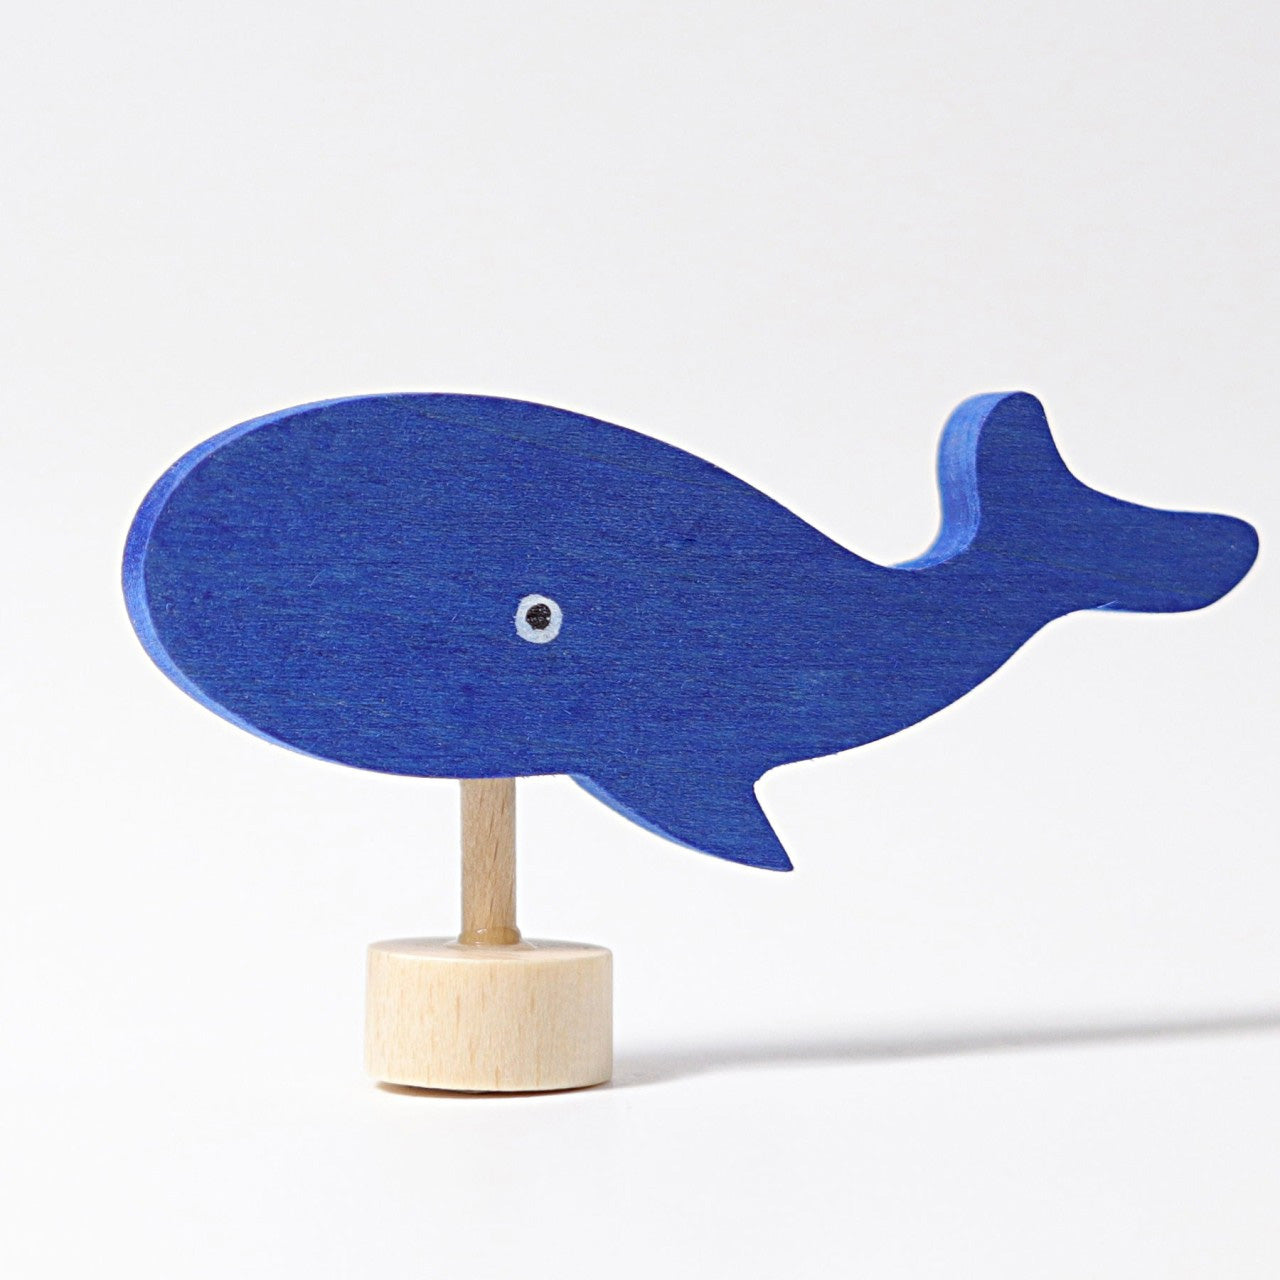 Blue whale ornament made of wood for celebration rings